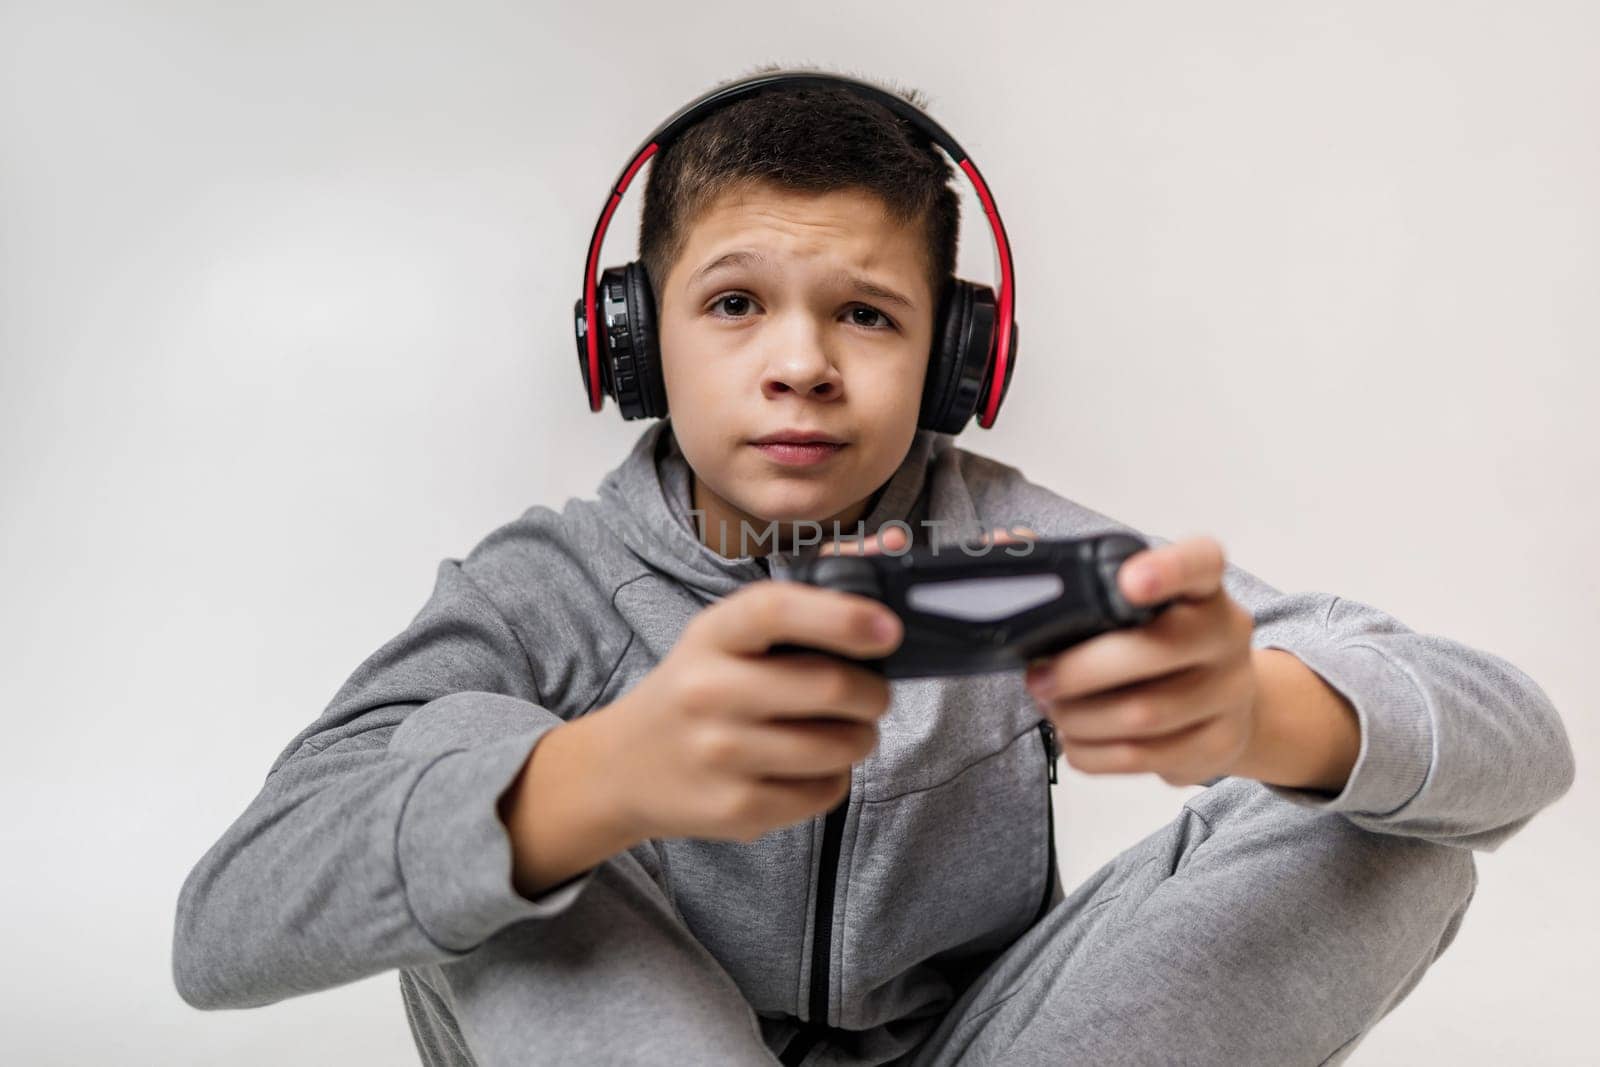 concentrated child boy playing video games over gray background. young gamer playing with game console